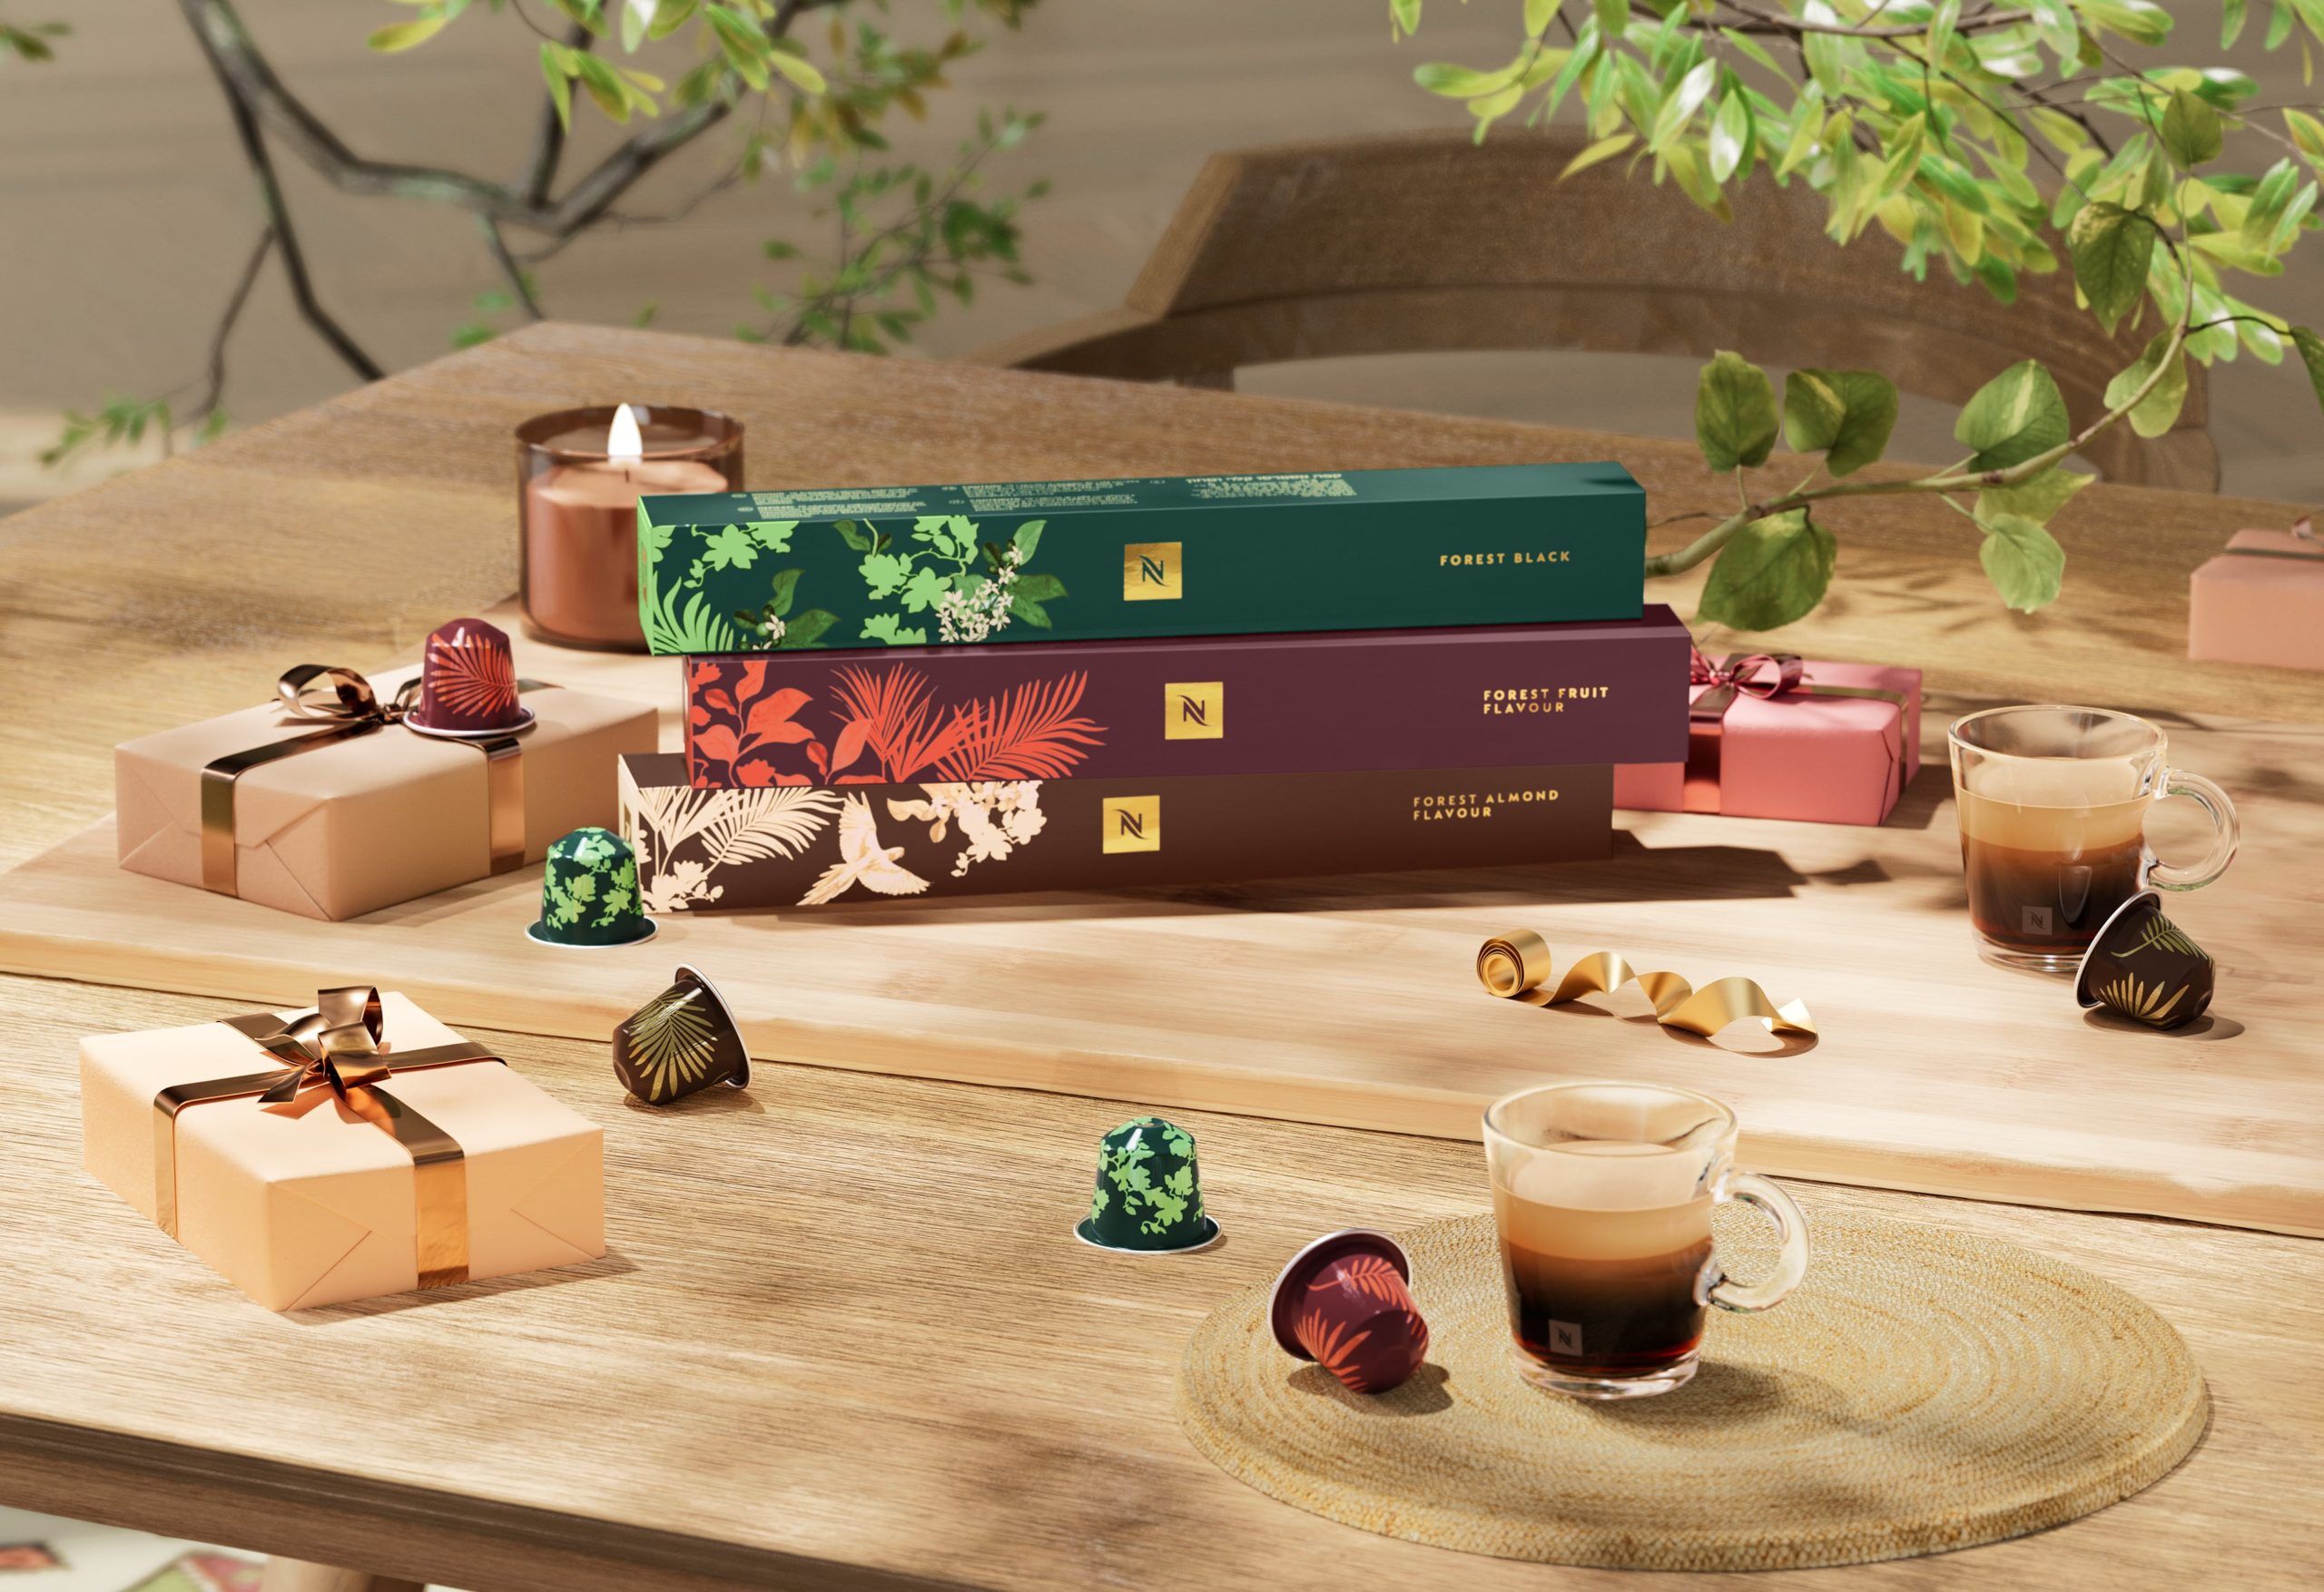 Nespresso X Johanna Ortiz presents a Festive collection called ‘Gifts